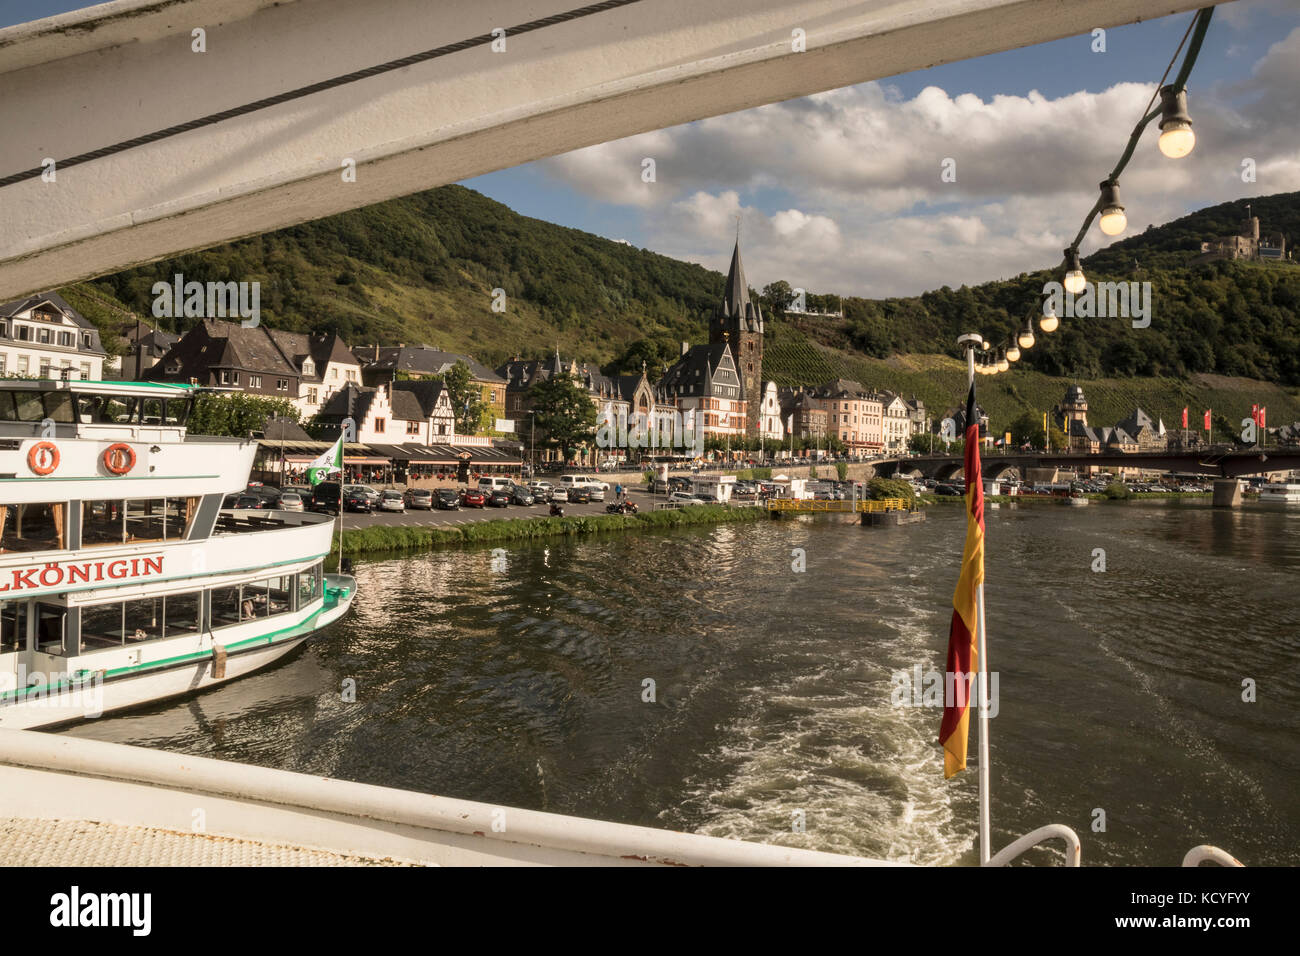 The town of Bernkastel-Kues, in the Mosel Valley, Germany Photographed from a River Cruiser Stock Photo